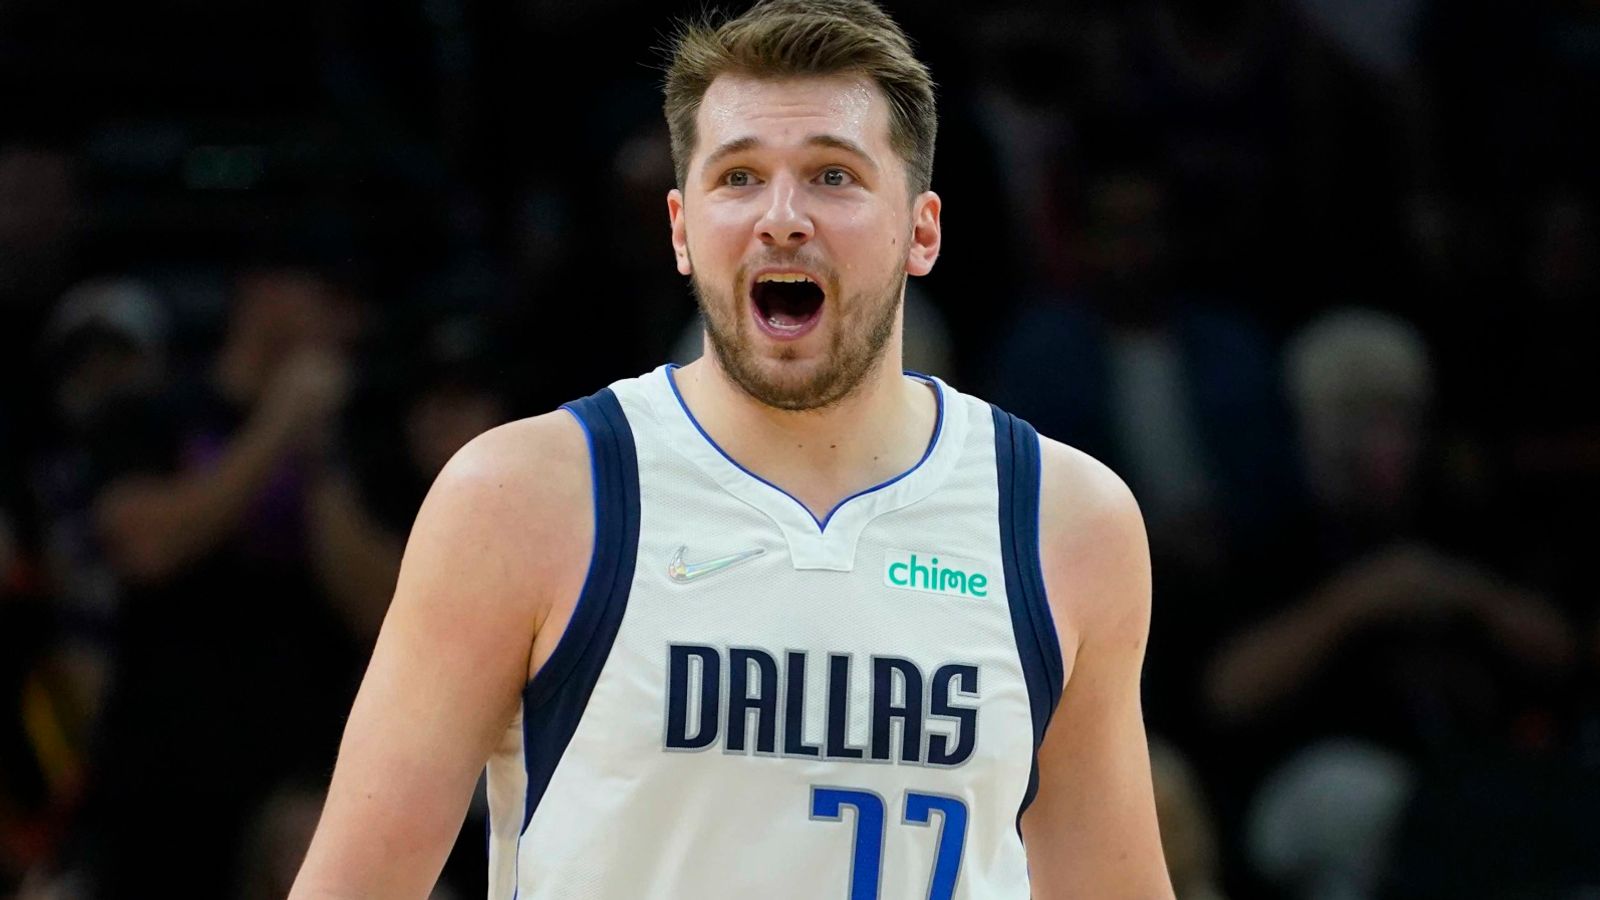 Luka Doncic Is Playing With His Back to the Basket and His Eye on